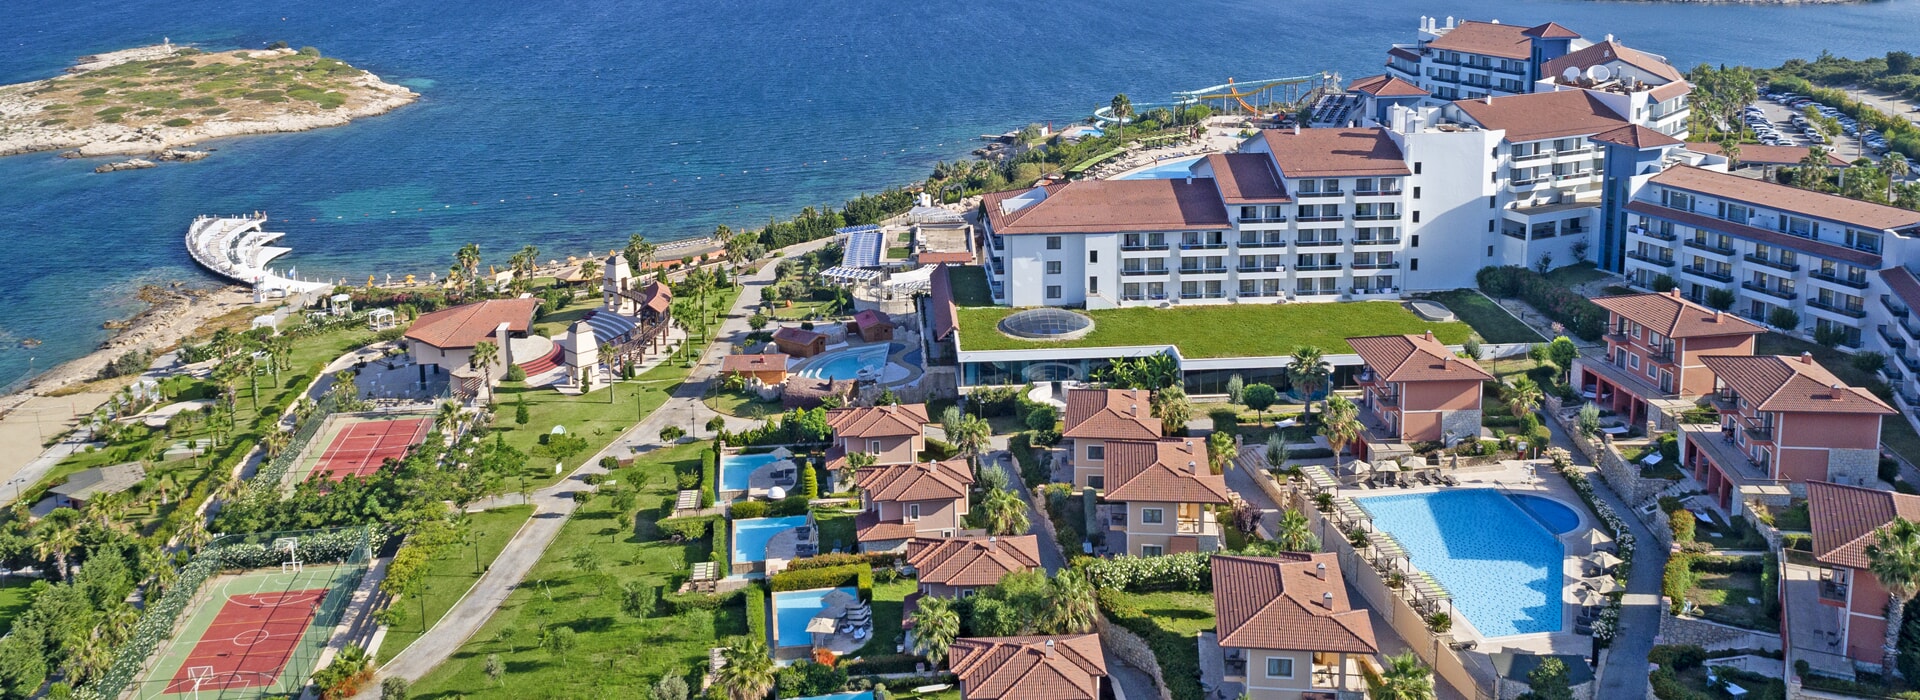 Royal Teos Thermal Resort Clinic & Spa – 5-star thermal hotel and physiotherapy, rehabilitation center with accommodation